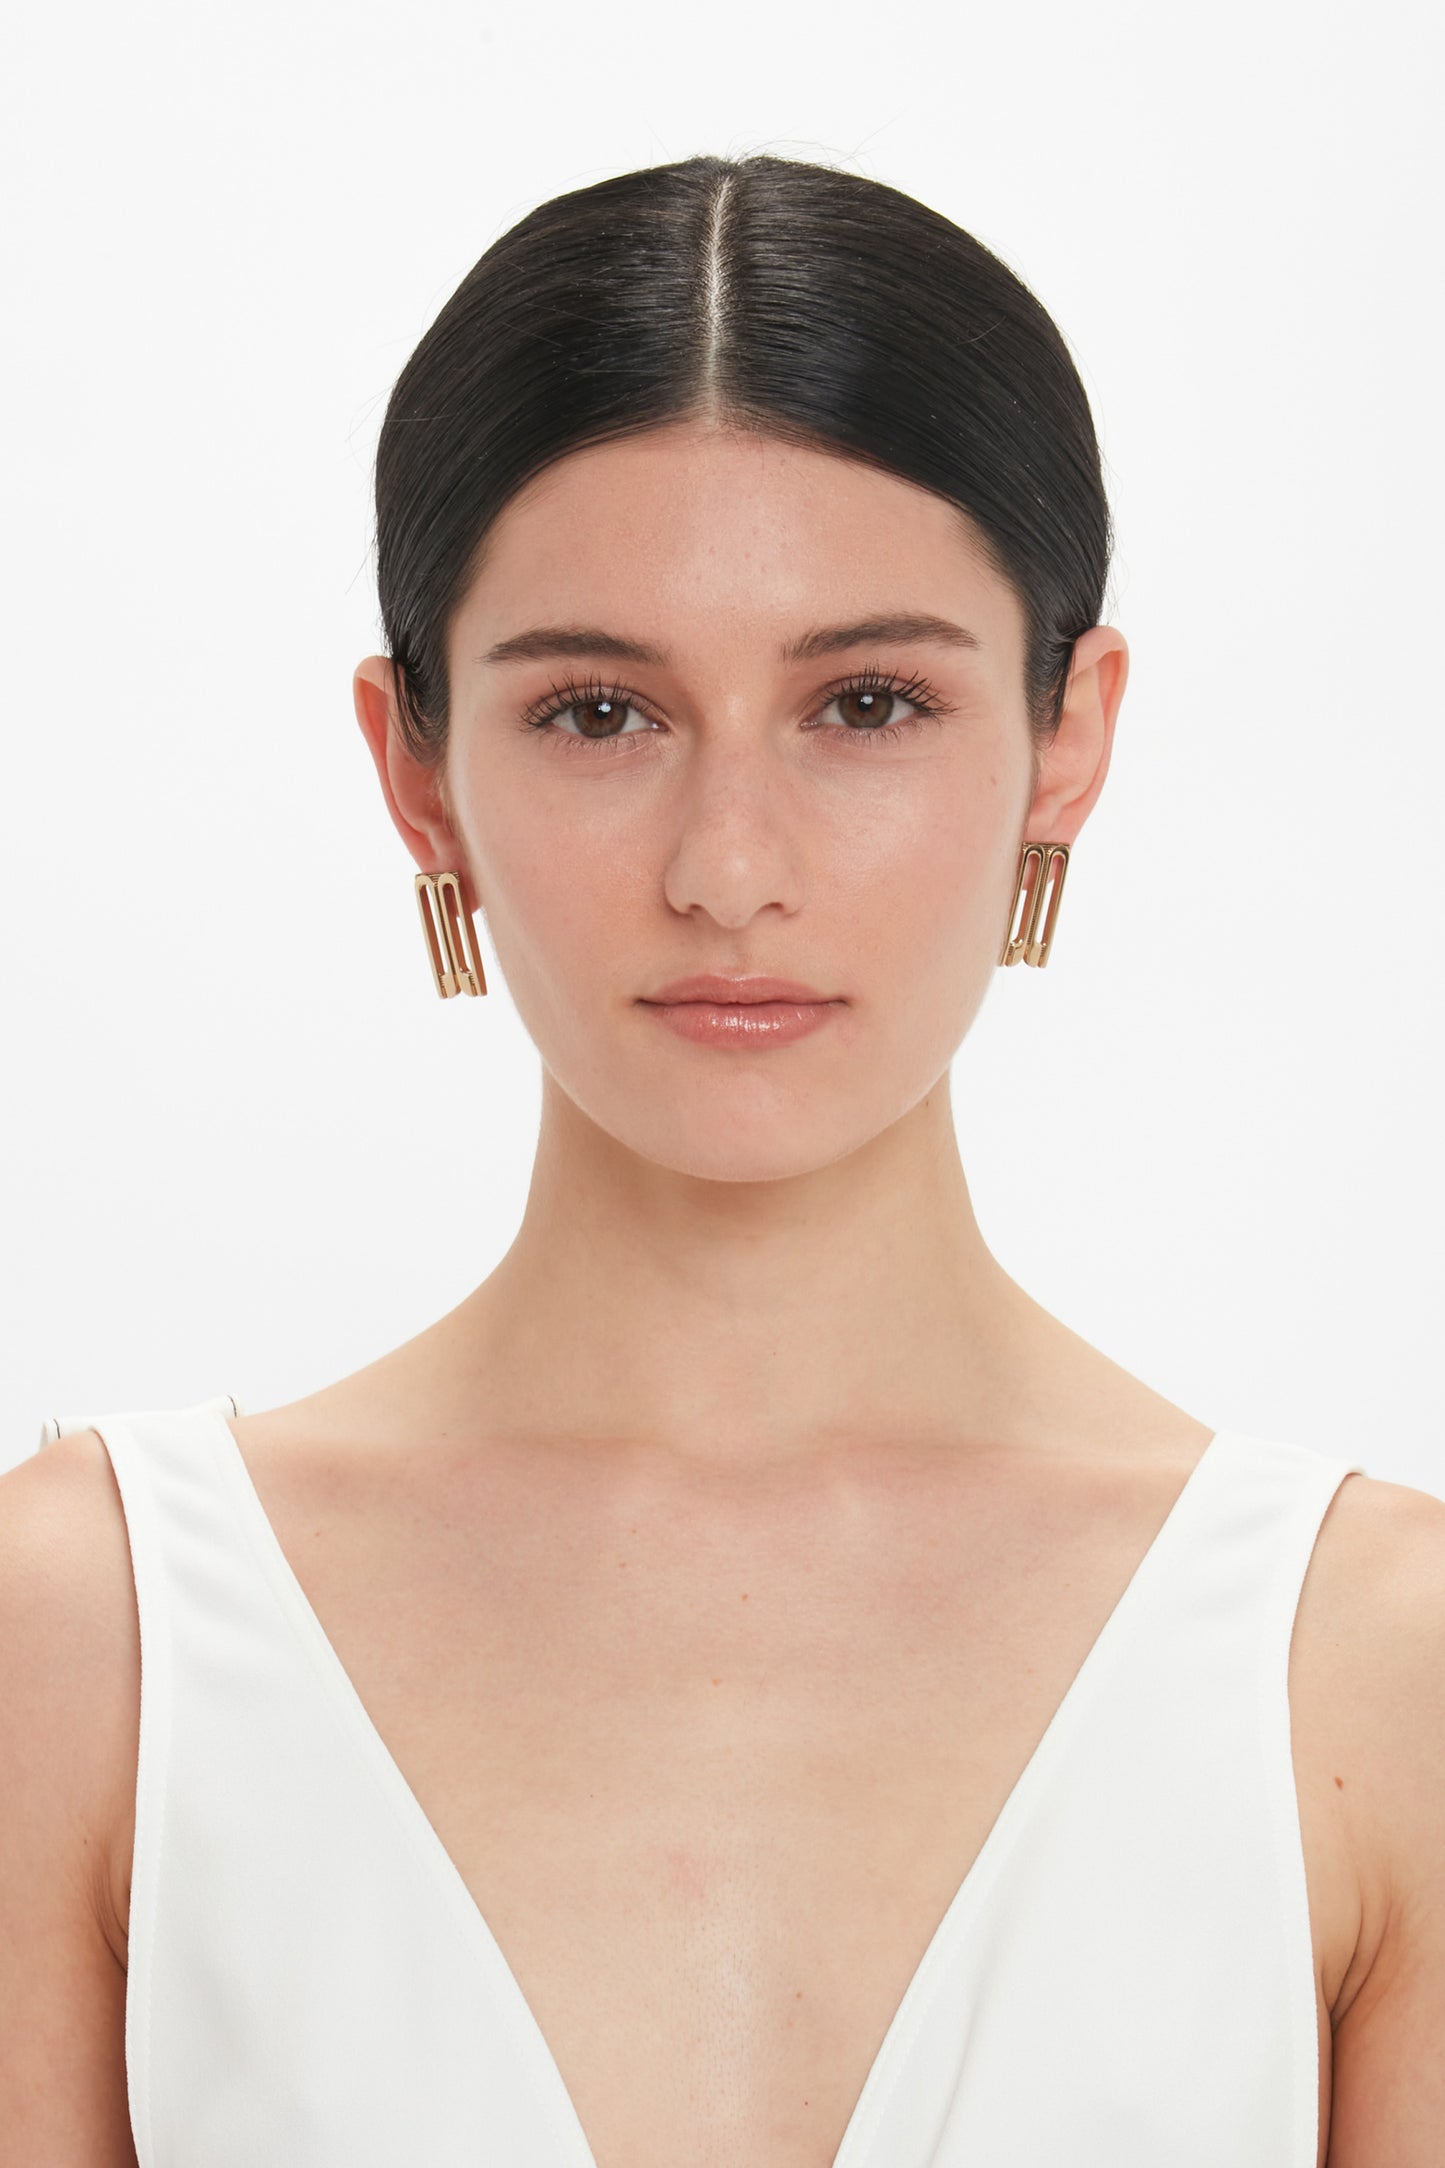 A person with dark hair tied back, wearing Victoria Beckham Exclusive Frame Stud Earrings In Gold and a white top, is looking straight ahead with a neutral expression.